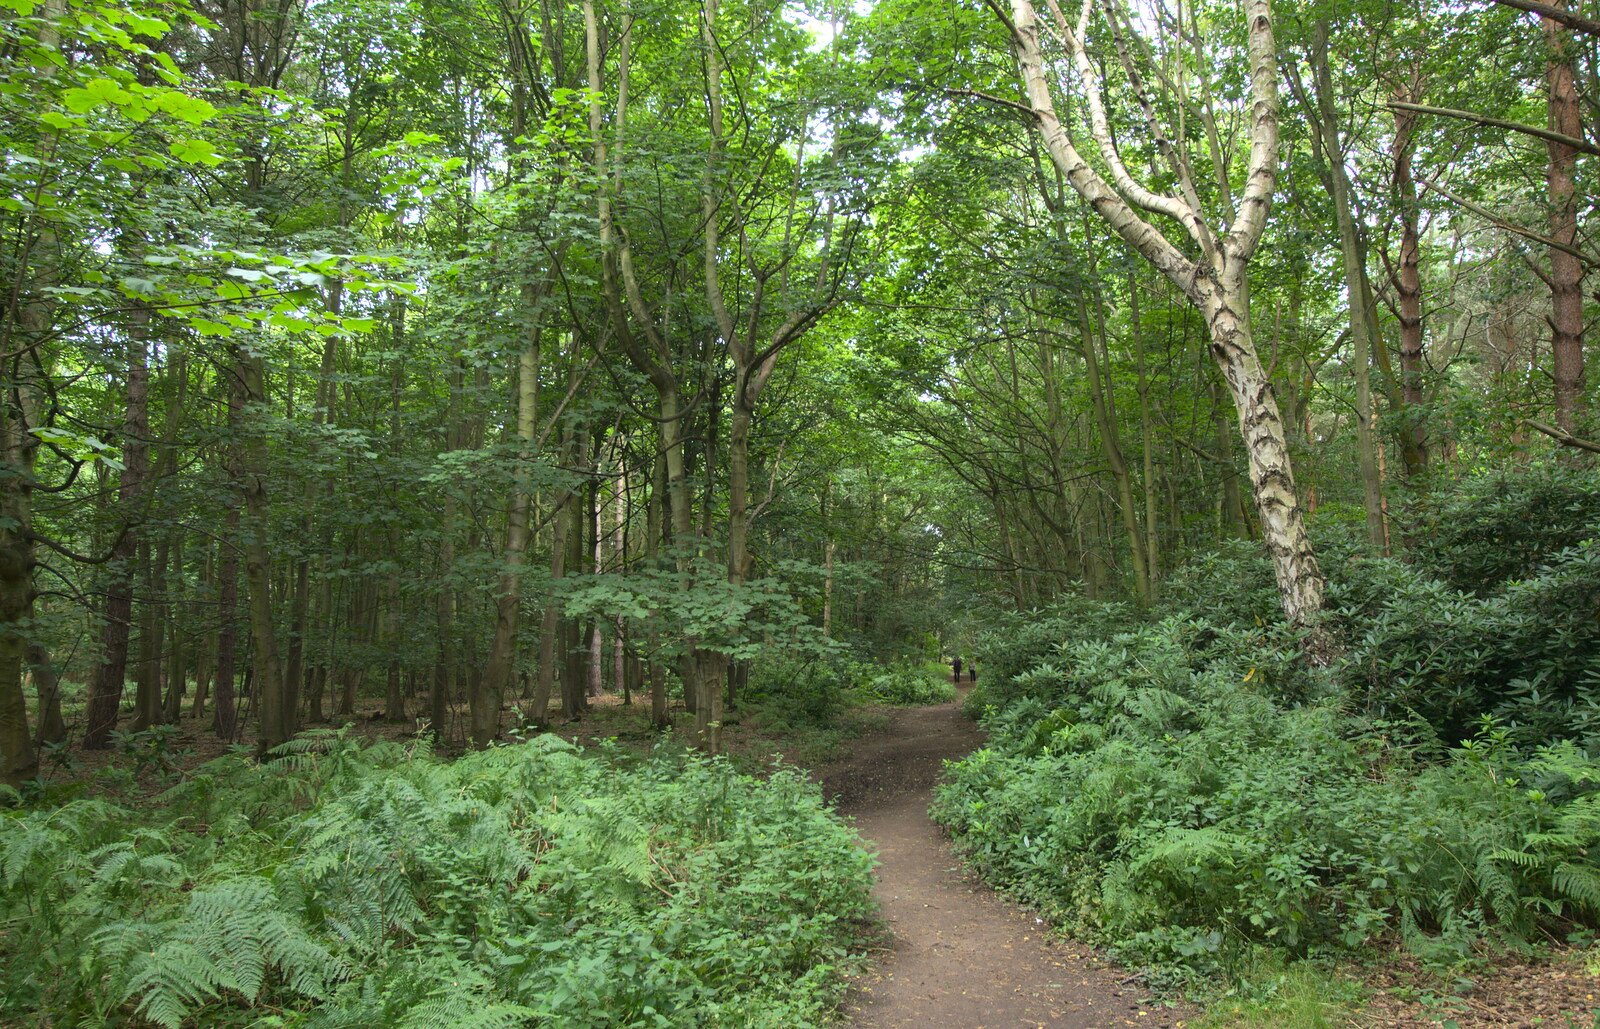 Leafy woods from Camping by the Seaside, Cliff House, Dunwich, Suffolk - 15th August 2012